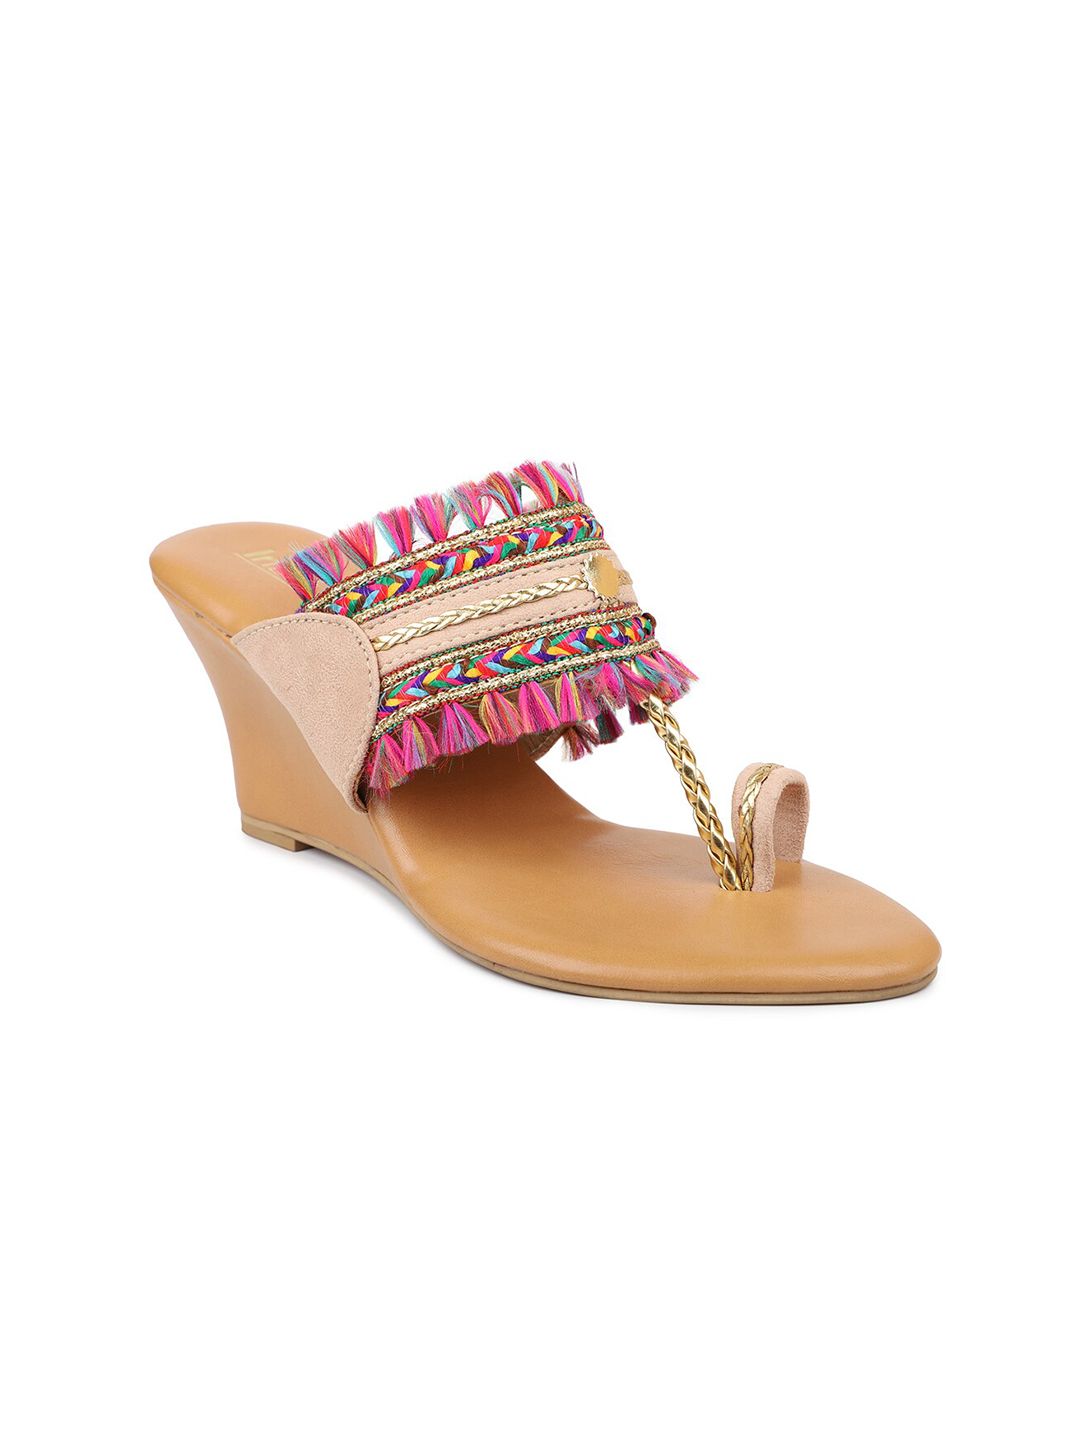 Inc 5 Beige & Pink Embellished Ethnic Wedges Price in India